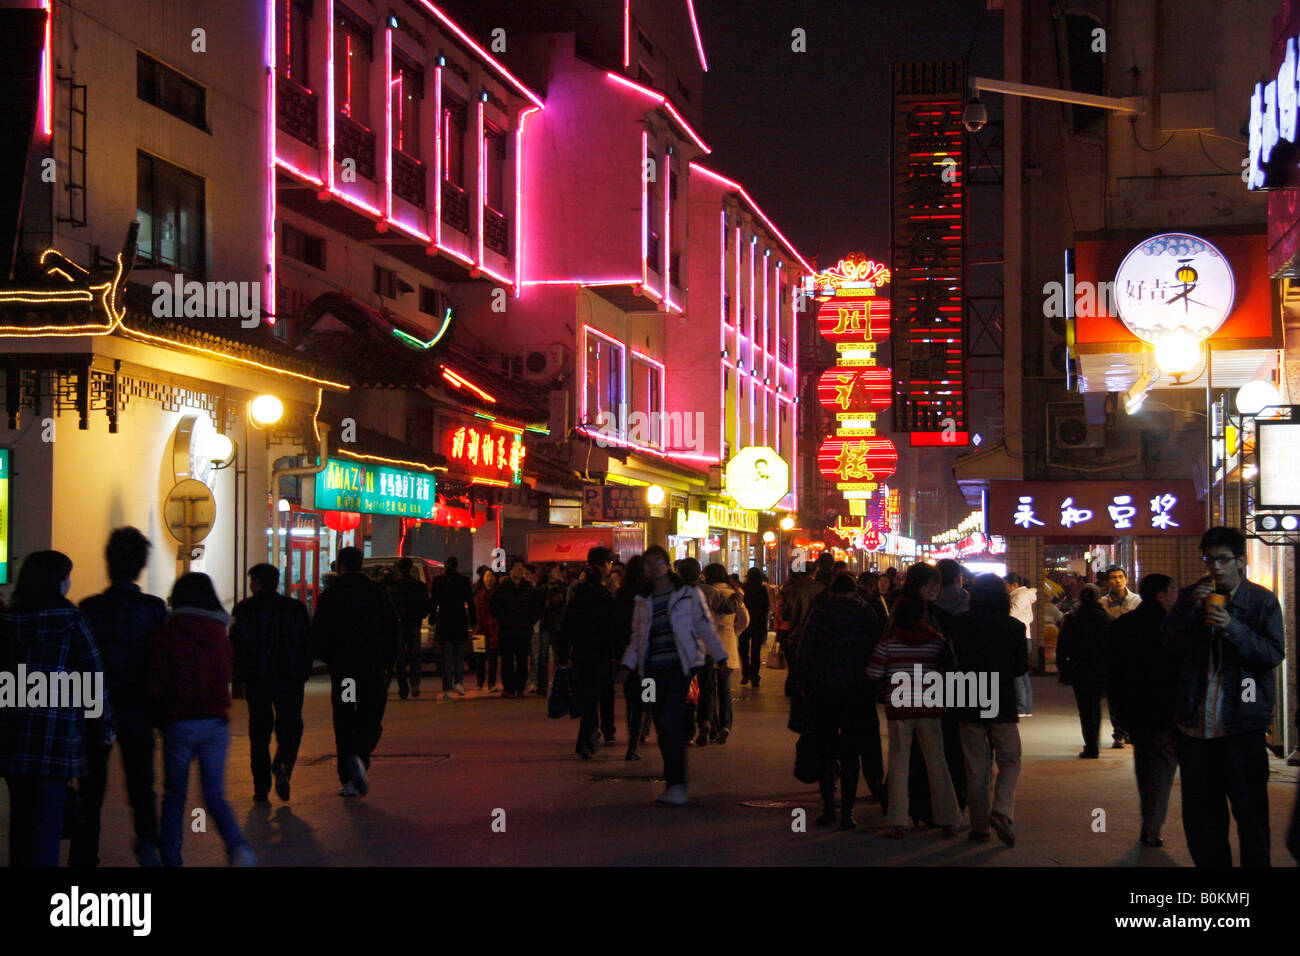 Busy nightlife in the main shopping street in Suzhou with many  shop signs,people and illuminations Stock Photo